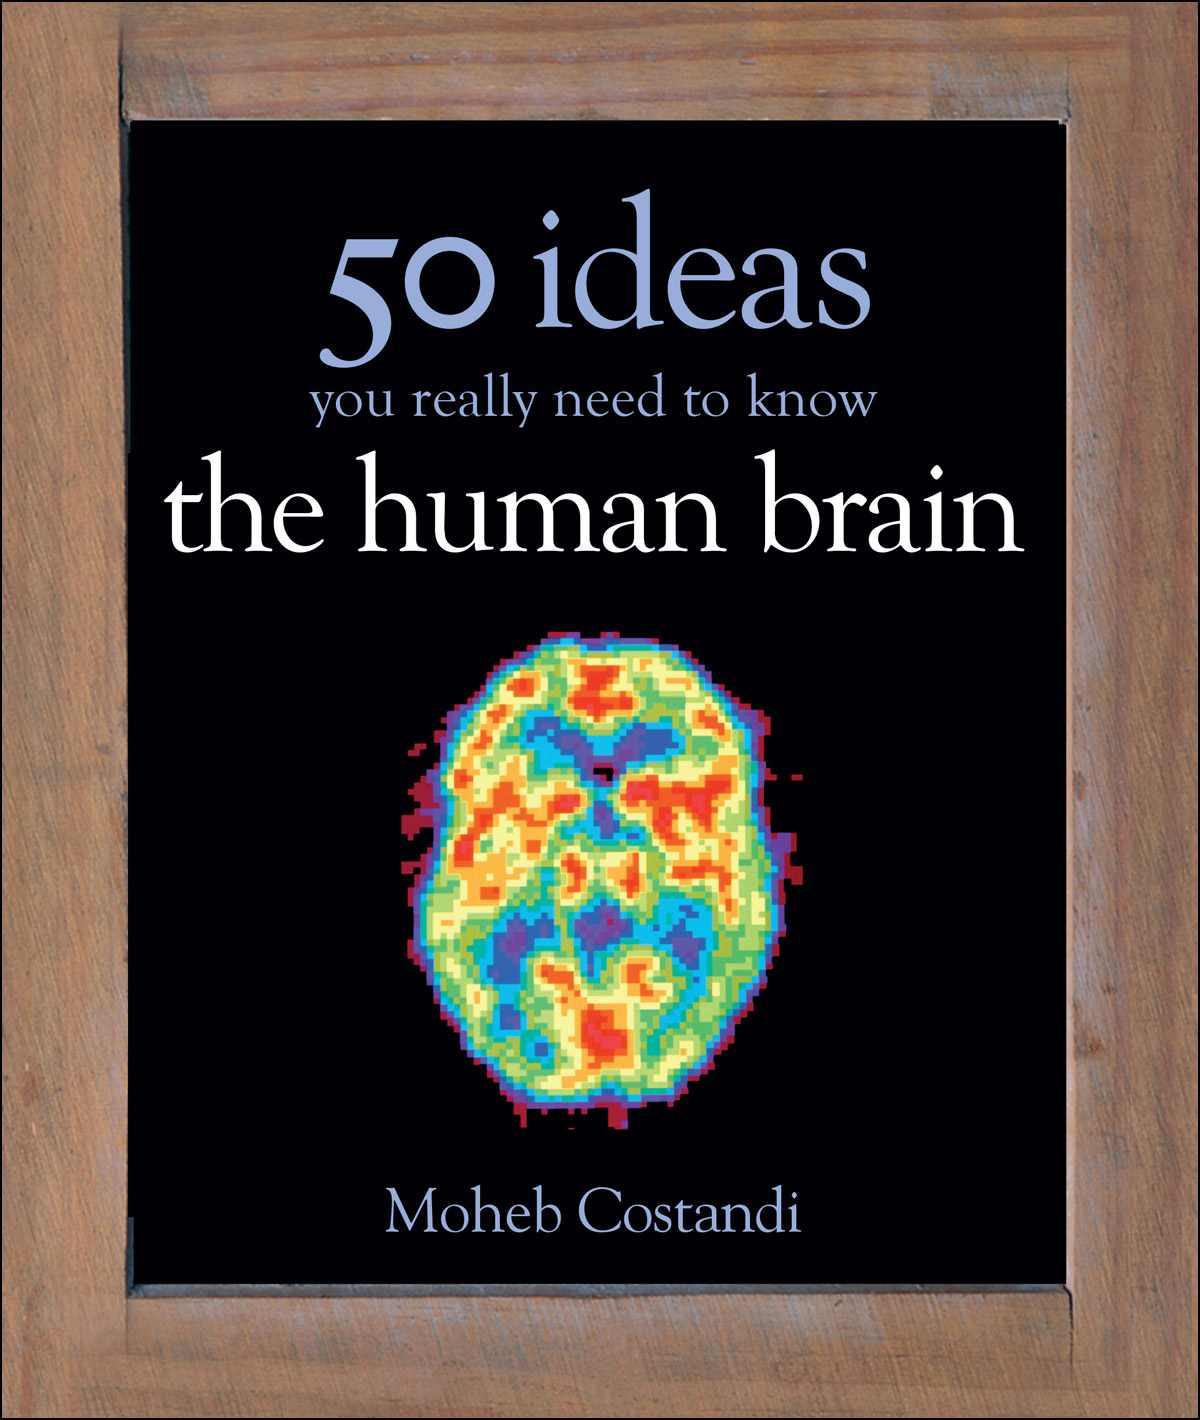 50 Human Brain Ideas You Really Need to Know (50 Ideas You Really Need to Know series)